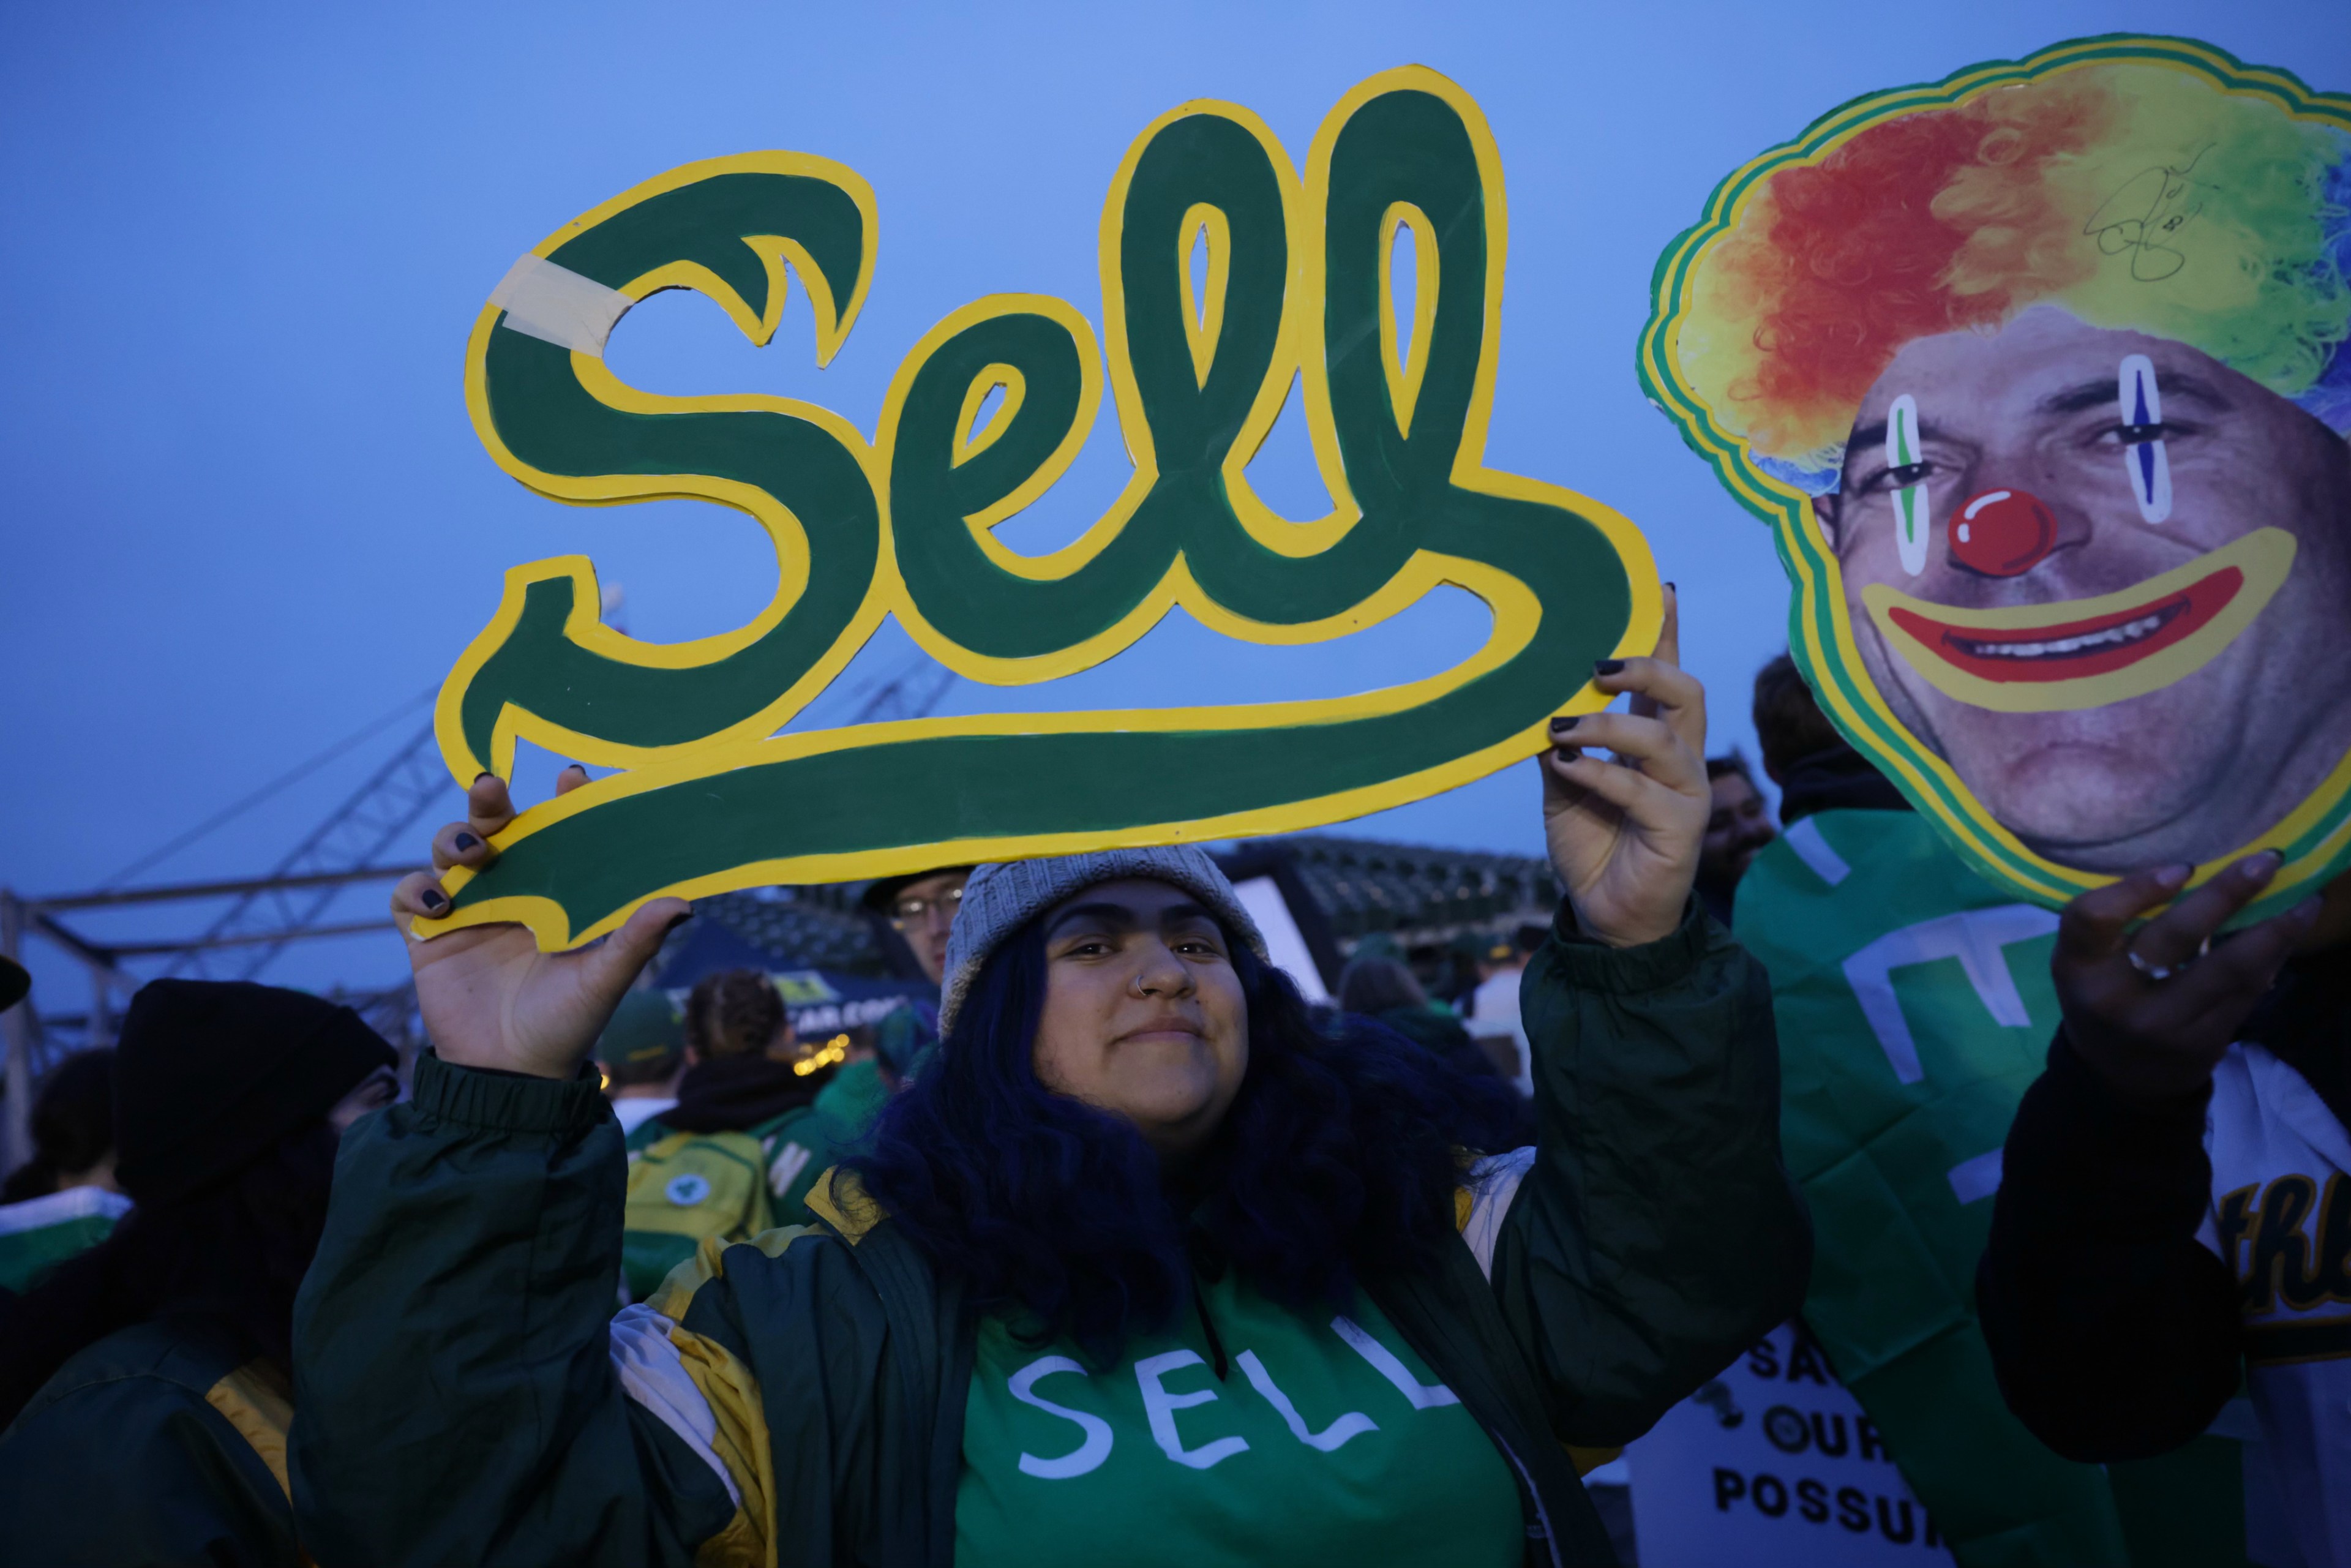 A person is holding up a yellow and green "Sell" sign next to someone with a clown face cutout. They appear to be at an event.